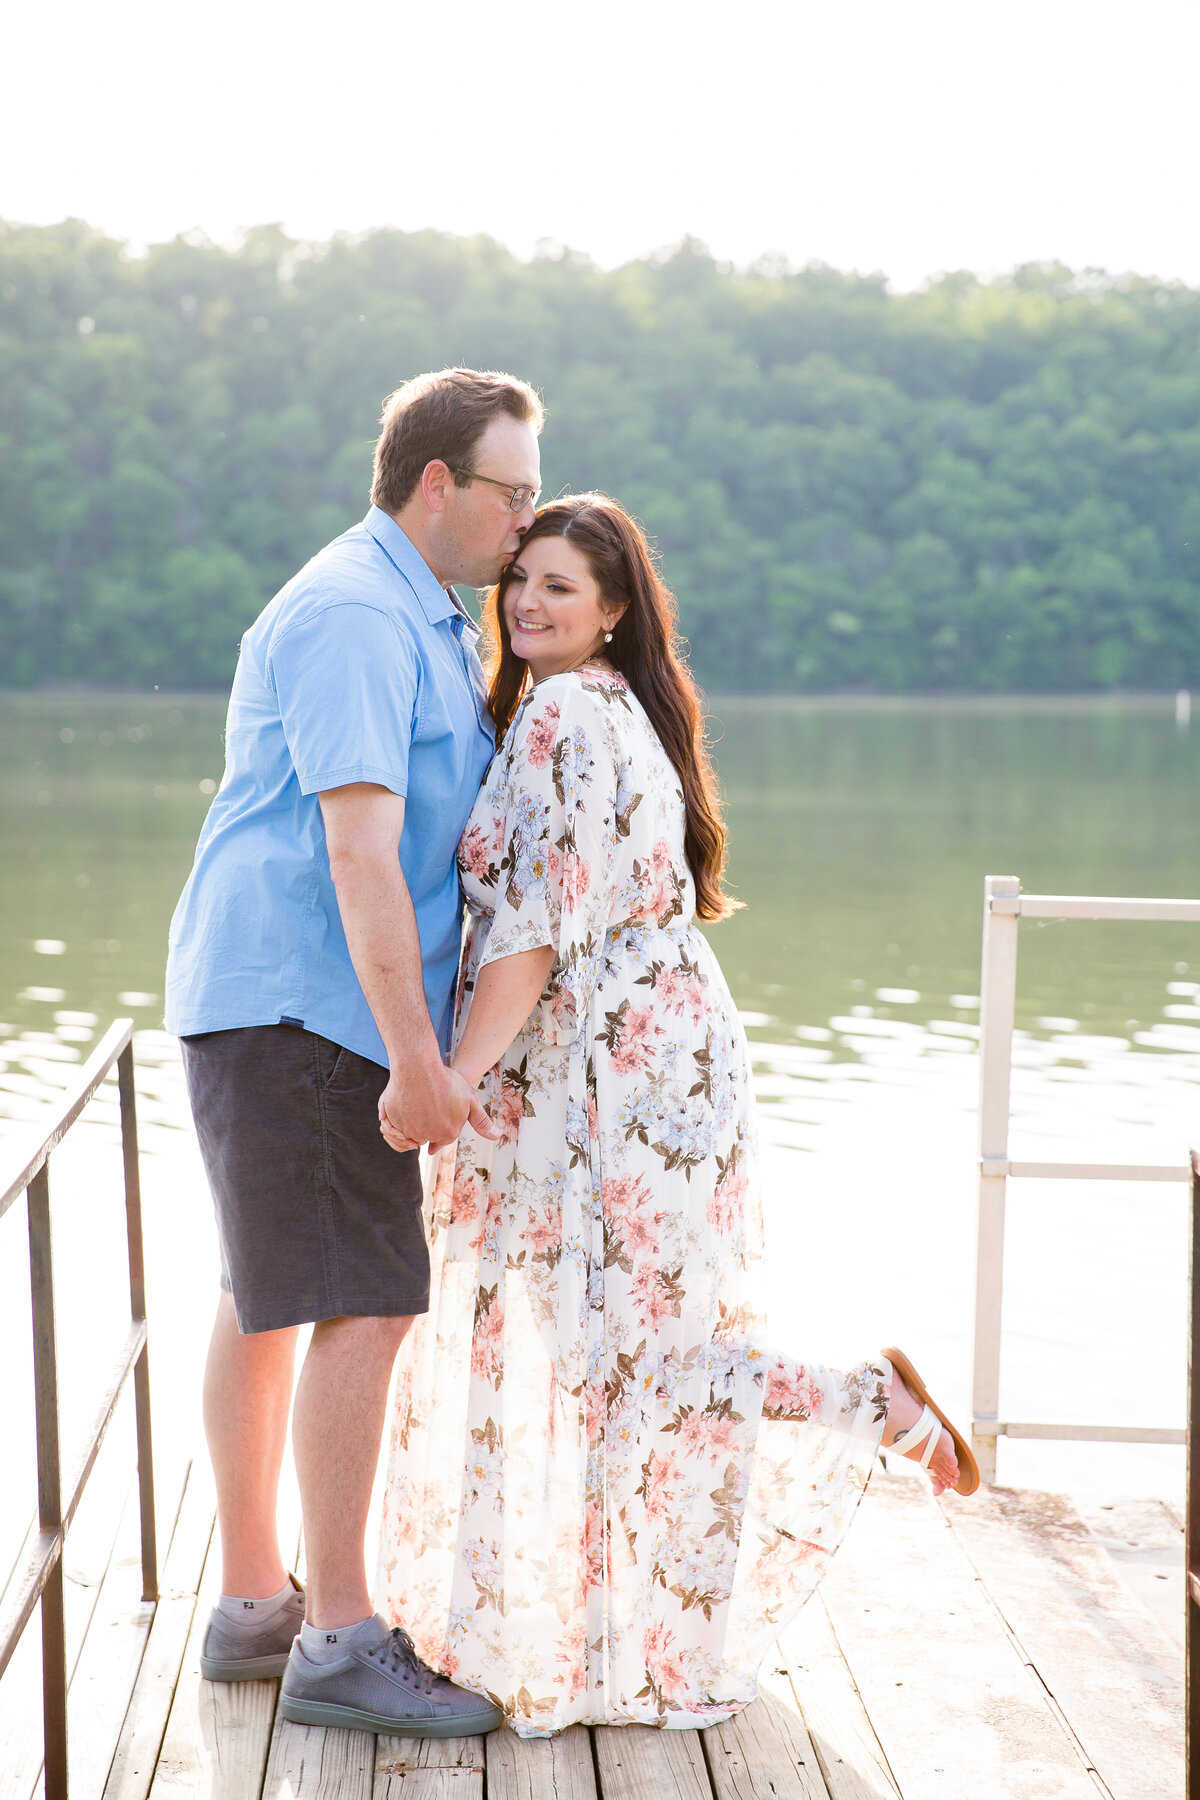 fall engagement session, engagement photographer columbia mo, best engagement photographer columbia mo, mid missouri best engagement photographers, engagement photography lake of the ozarks